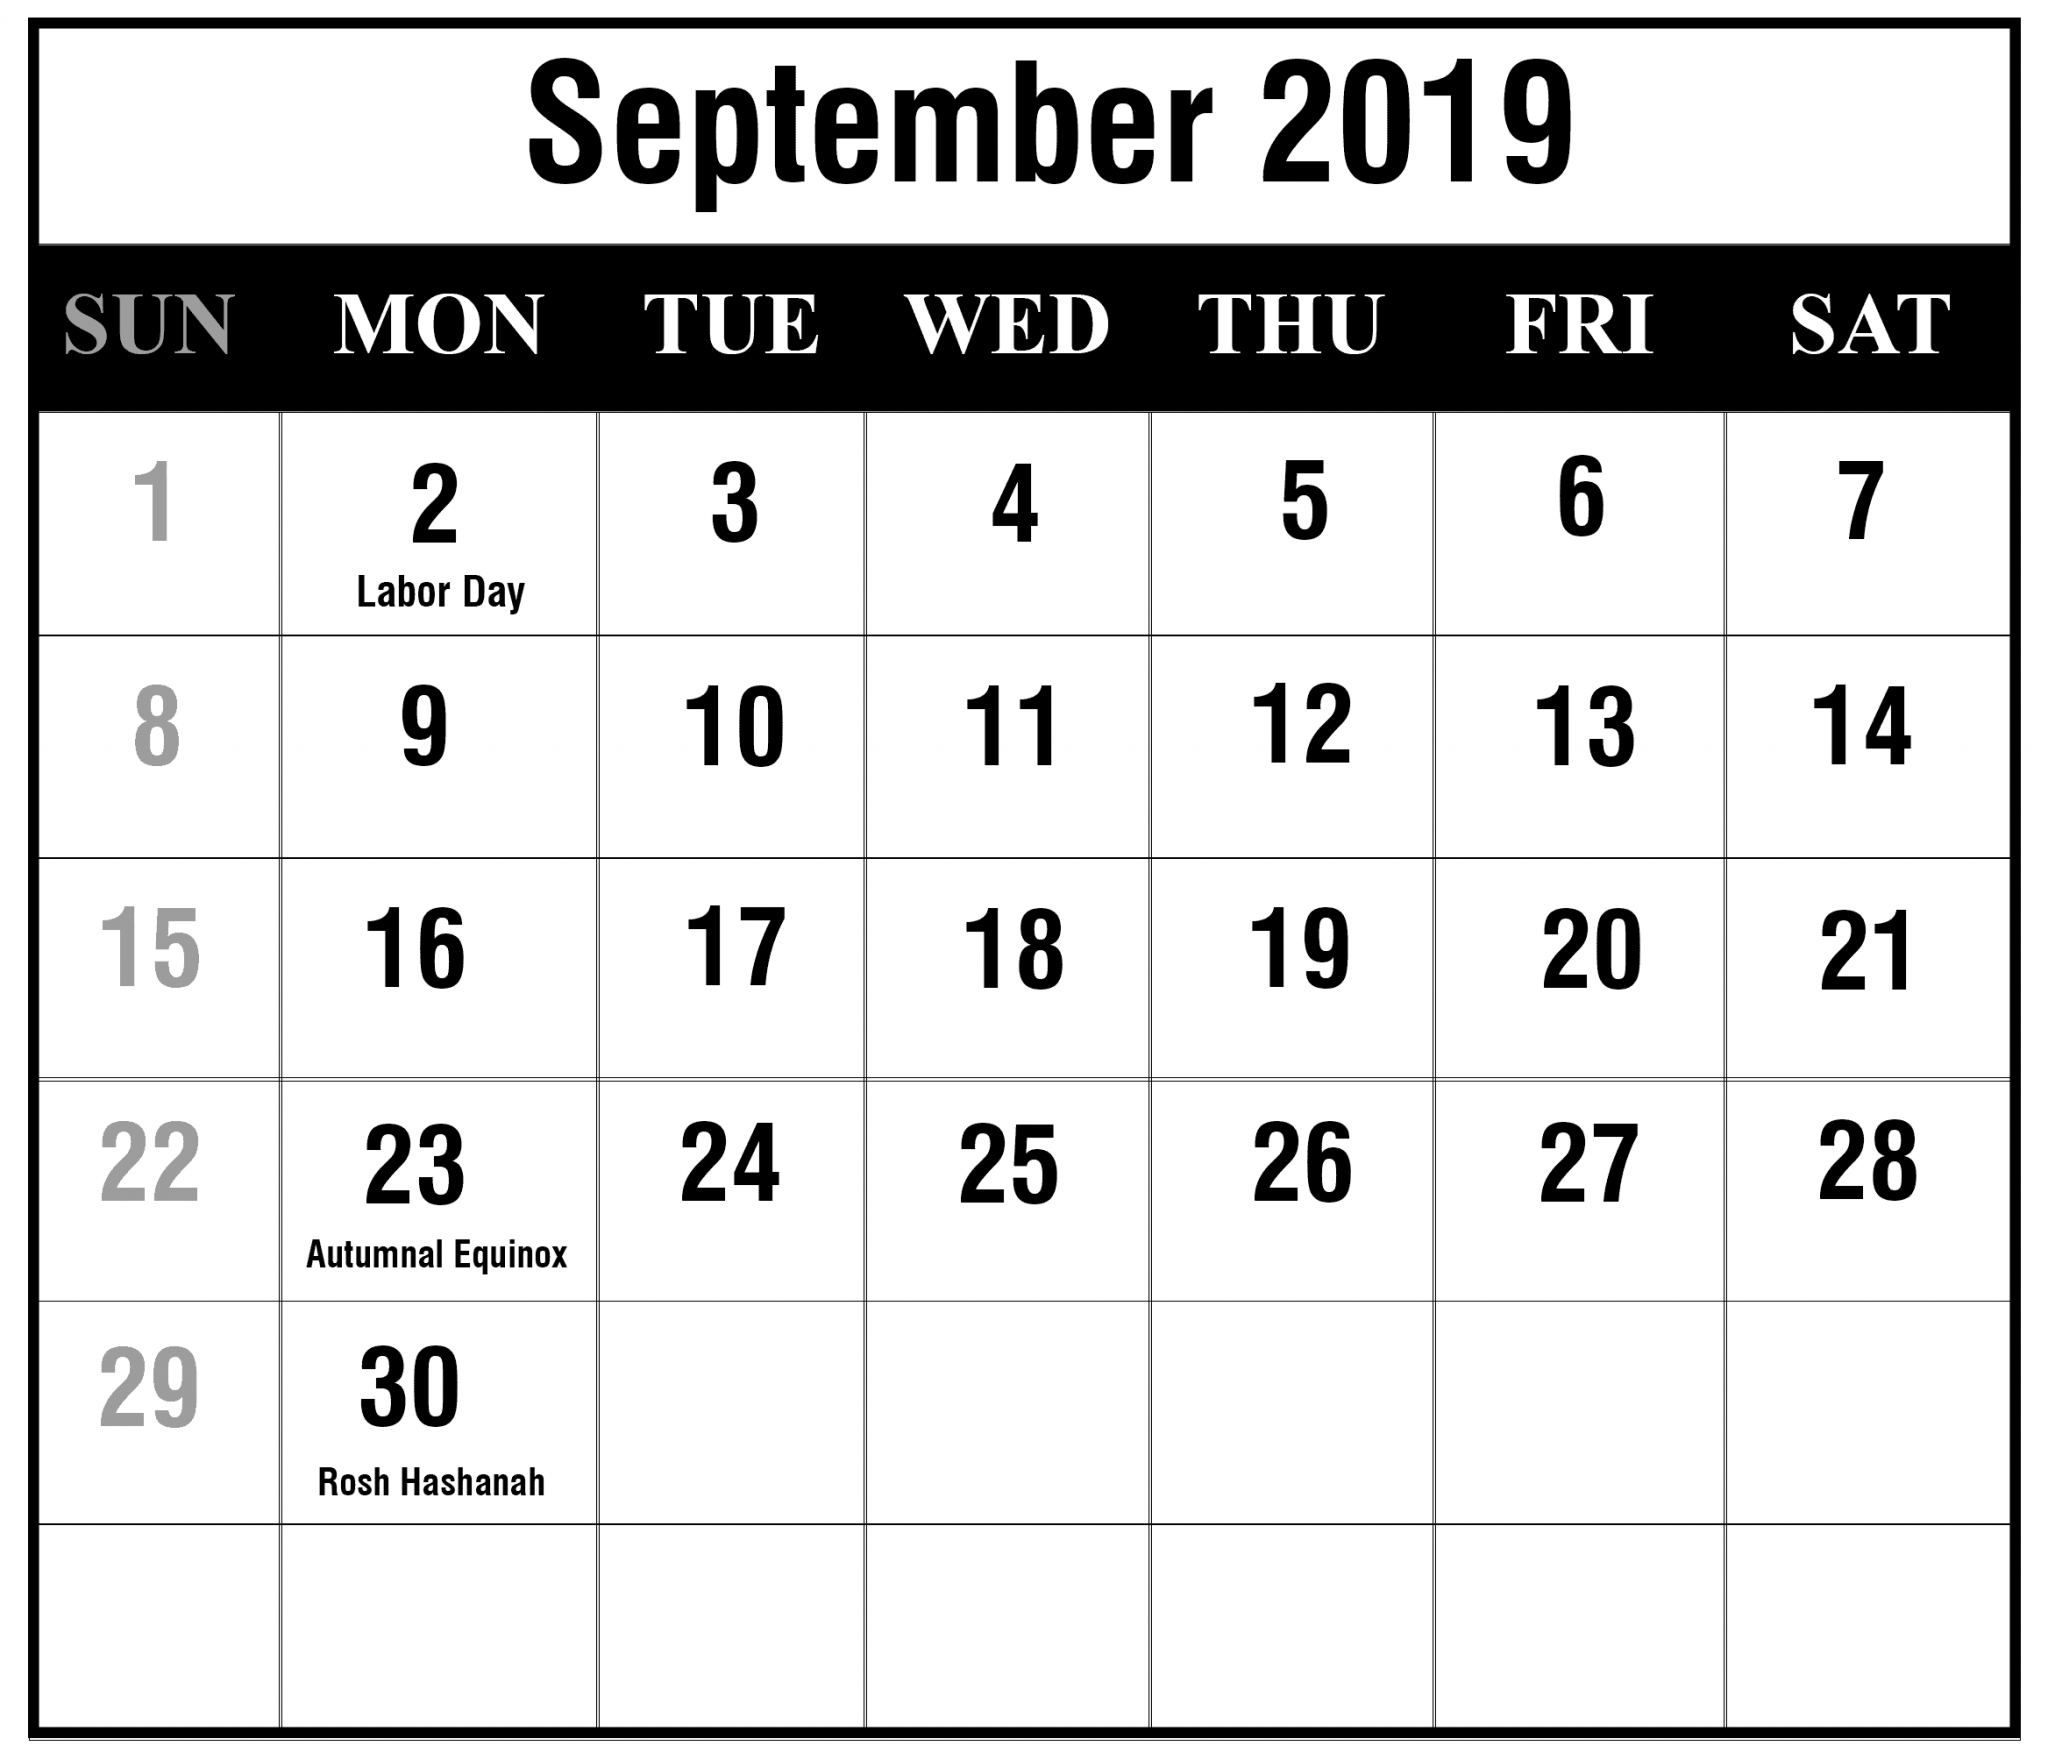 How To Schedule Your Month With September 2019 Printable Calendar How